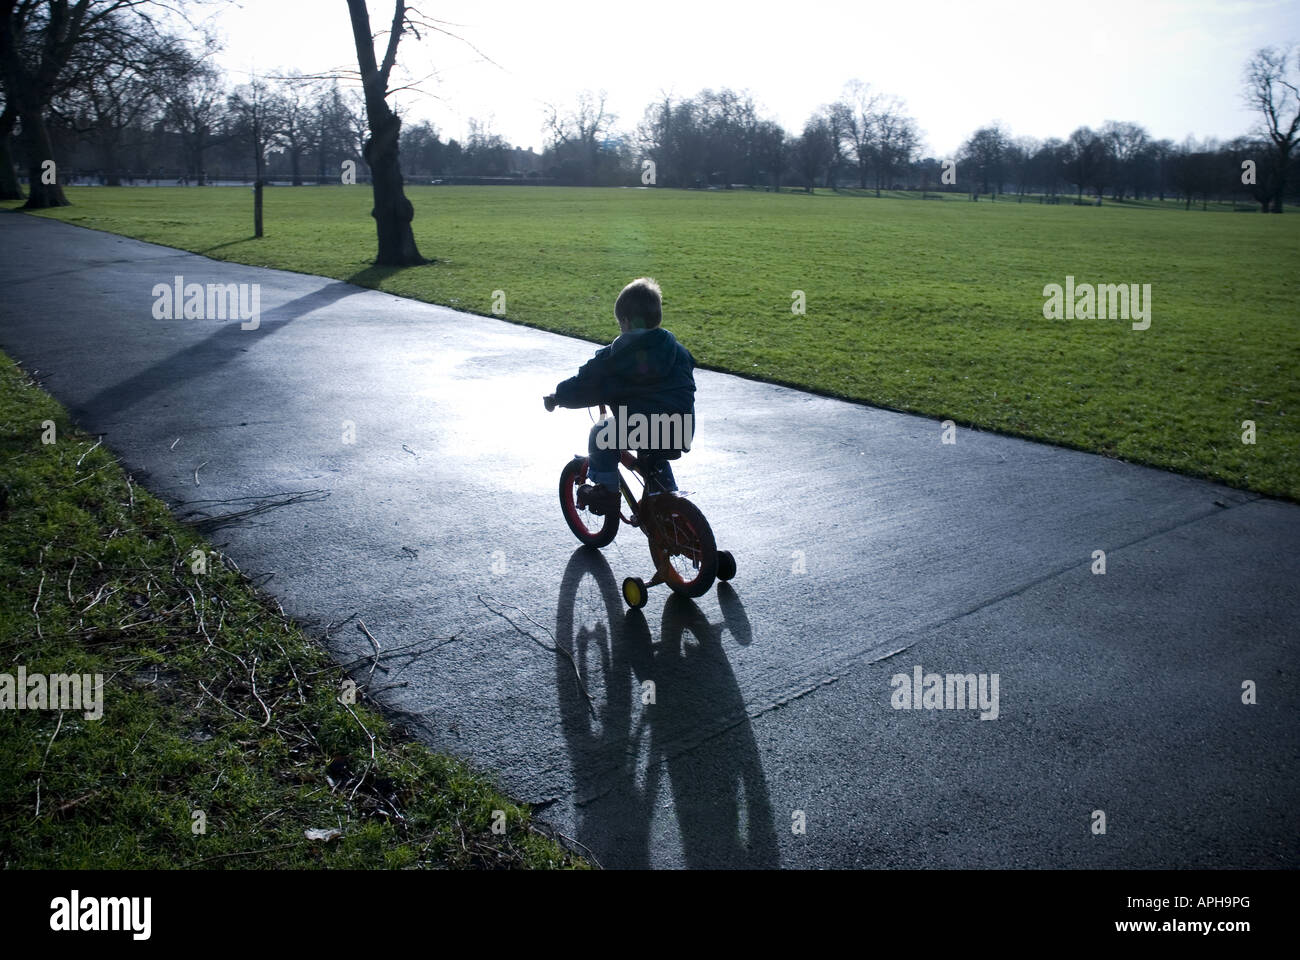 Kid on bicycle with stabilizers Stock Photo